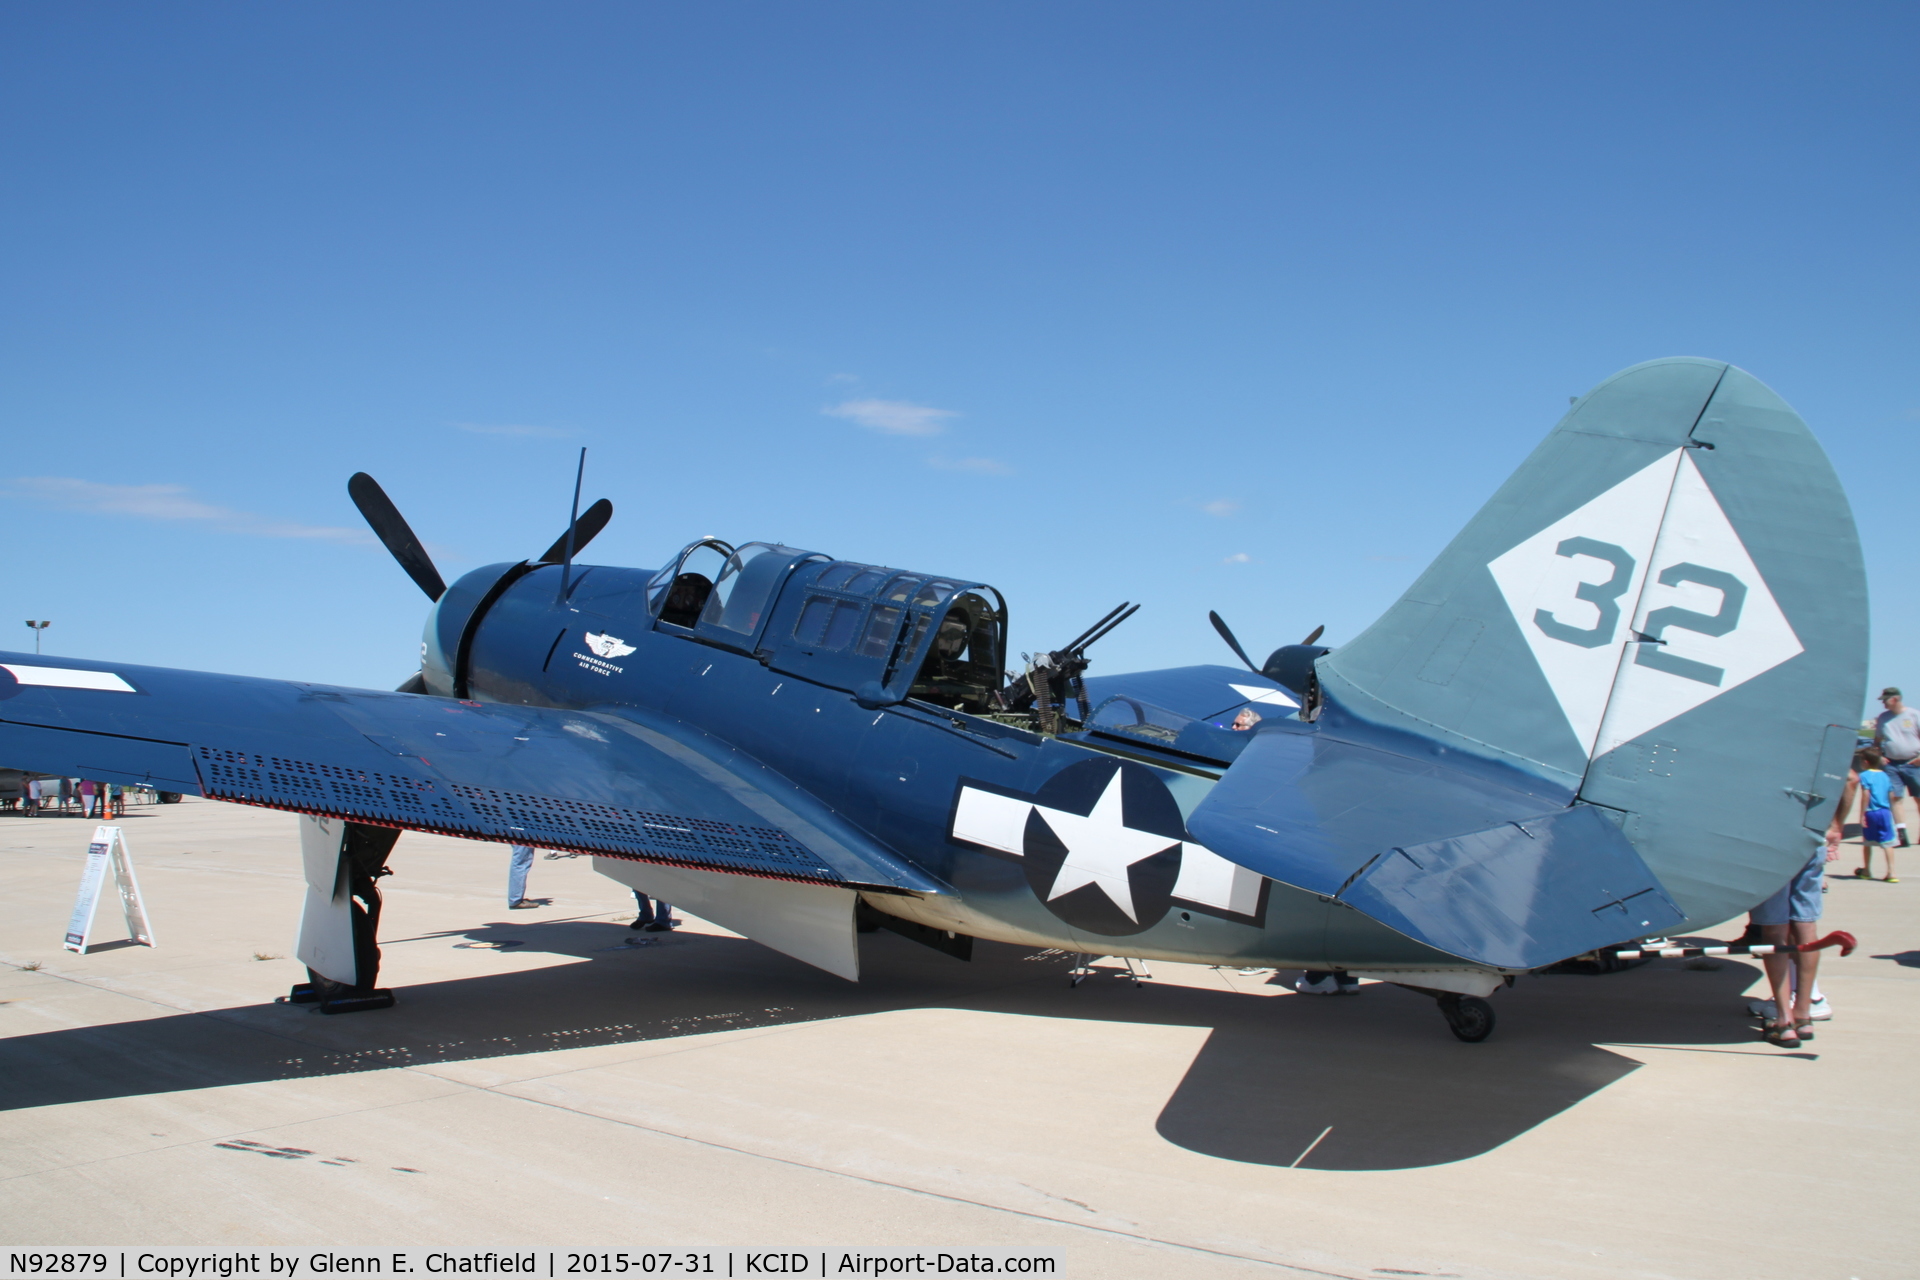 N92879, 1944 Curtiss SB2C-5 Helldiver C/N 83725, Parked for display